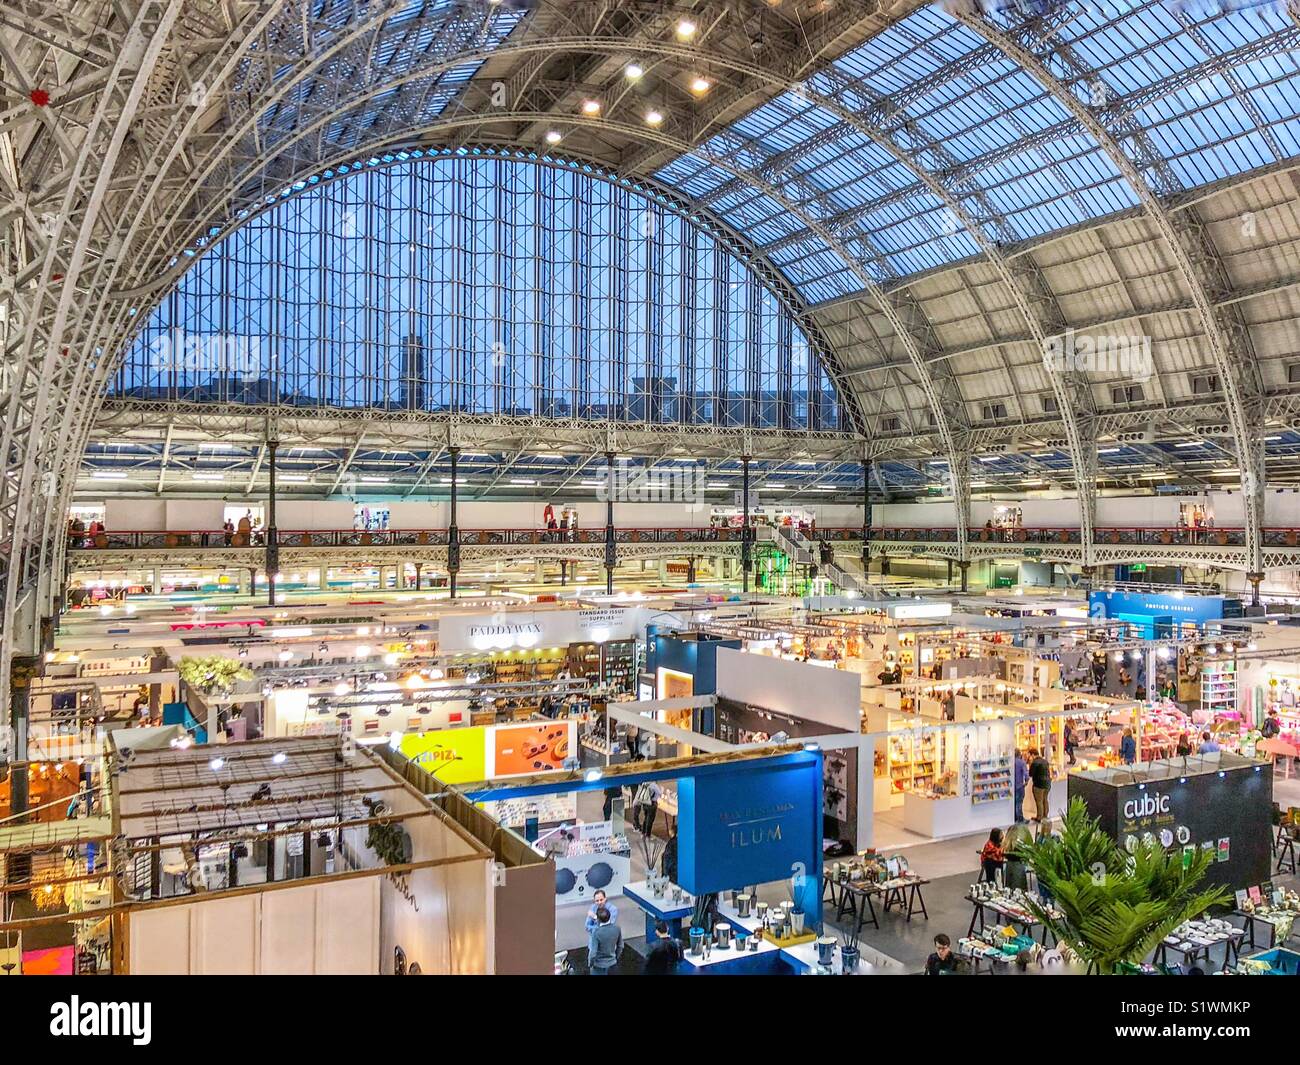 Messe in Olympia Exhibition Centre, London. Stockfoto